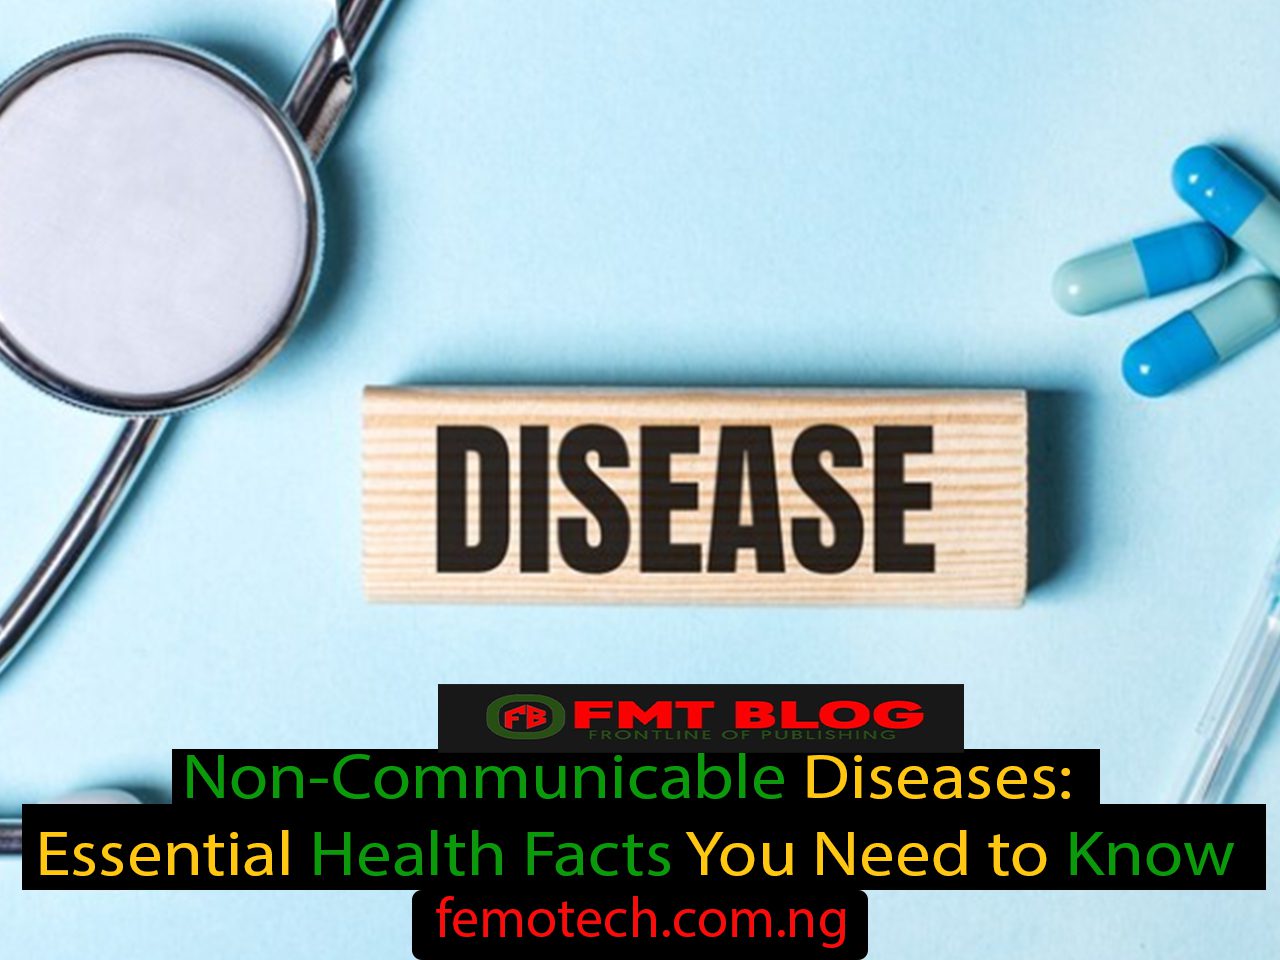 Non-Communicable Diseases: Essential Health Facts You Need to Know